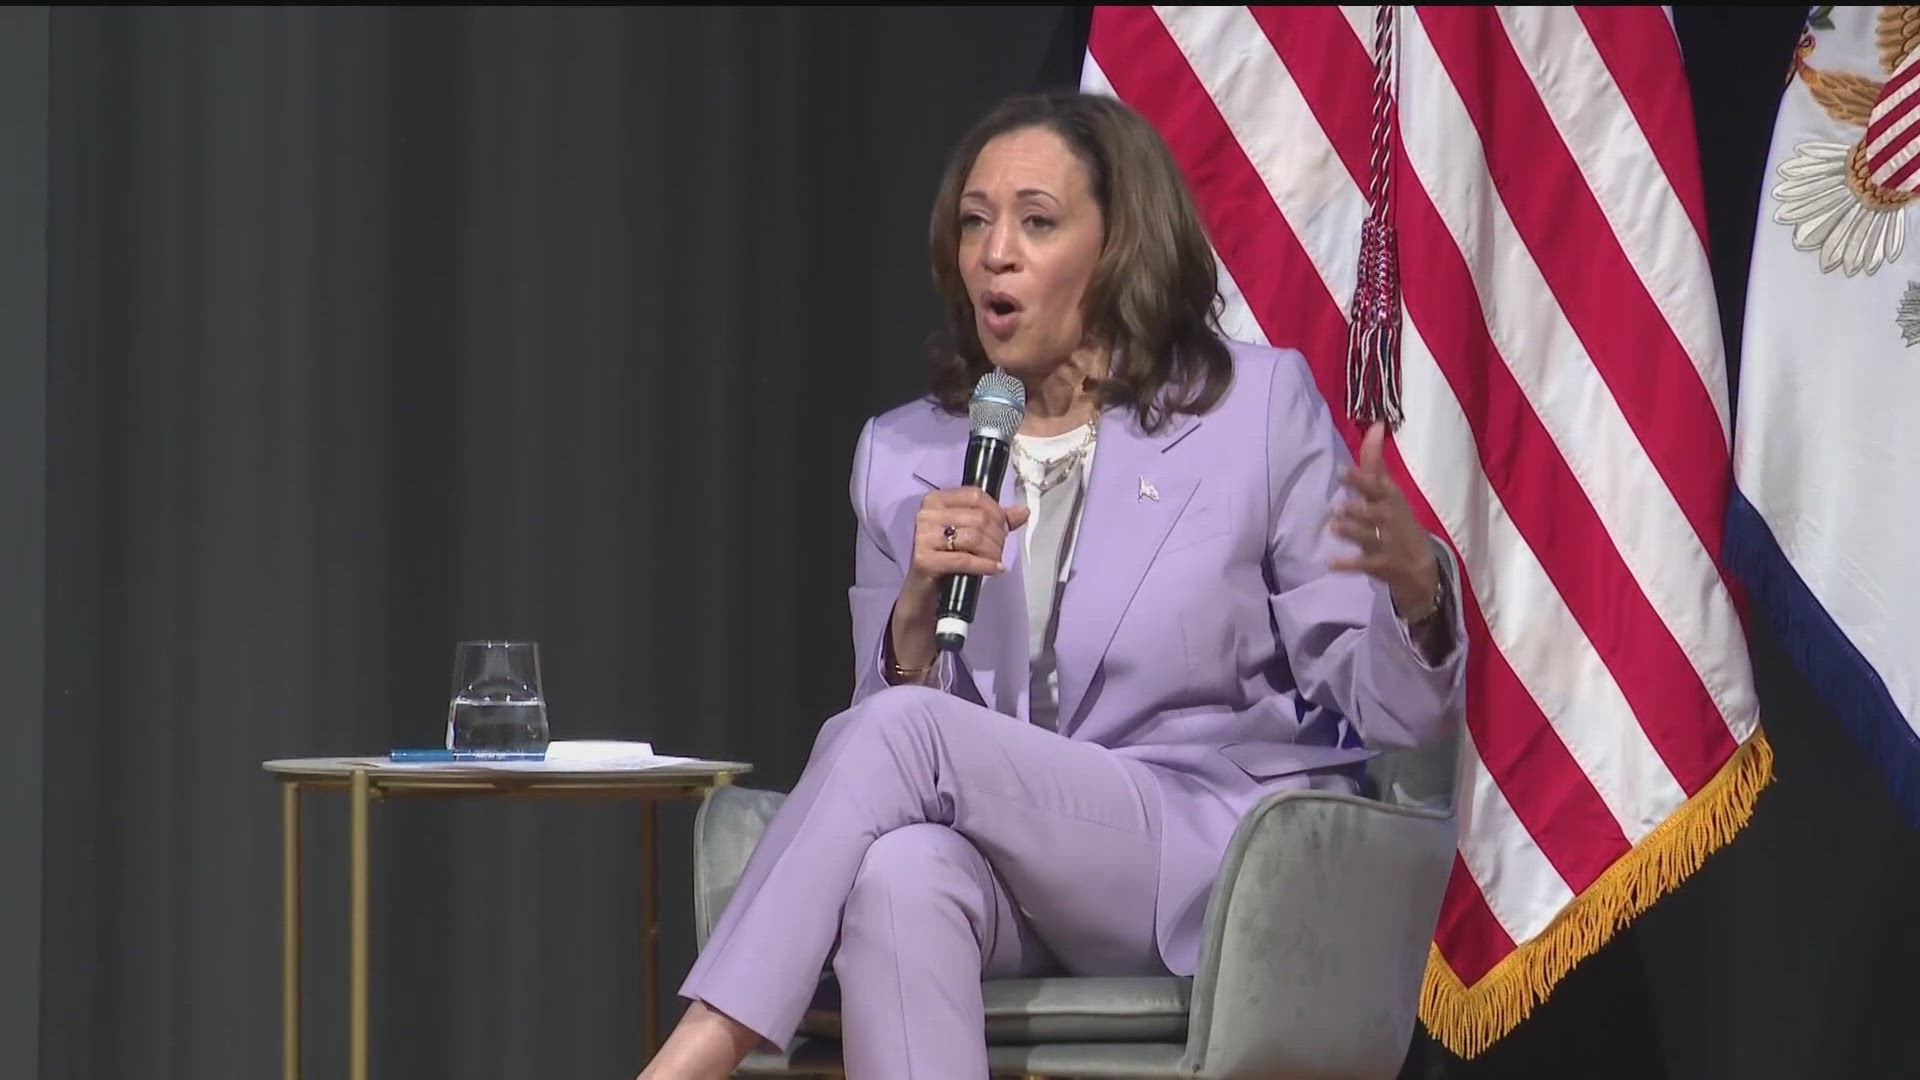 VP Kamala Harris joined Quavo to discuss gun violence prevention at the Rocket Foundation Summit on what would have been Takeoff's 30th birthday.